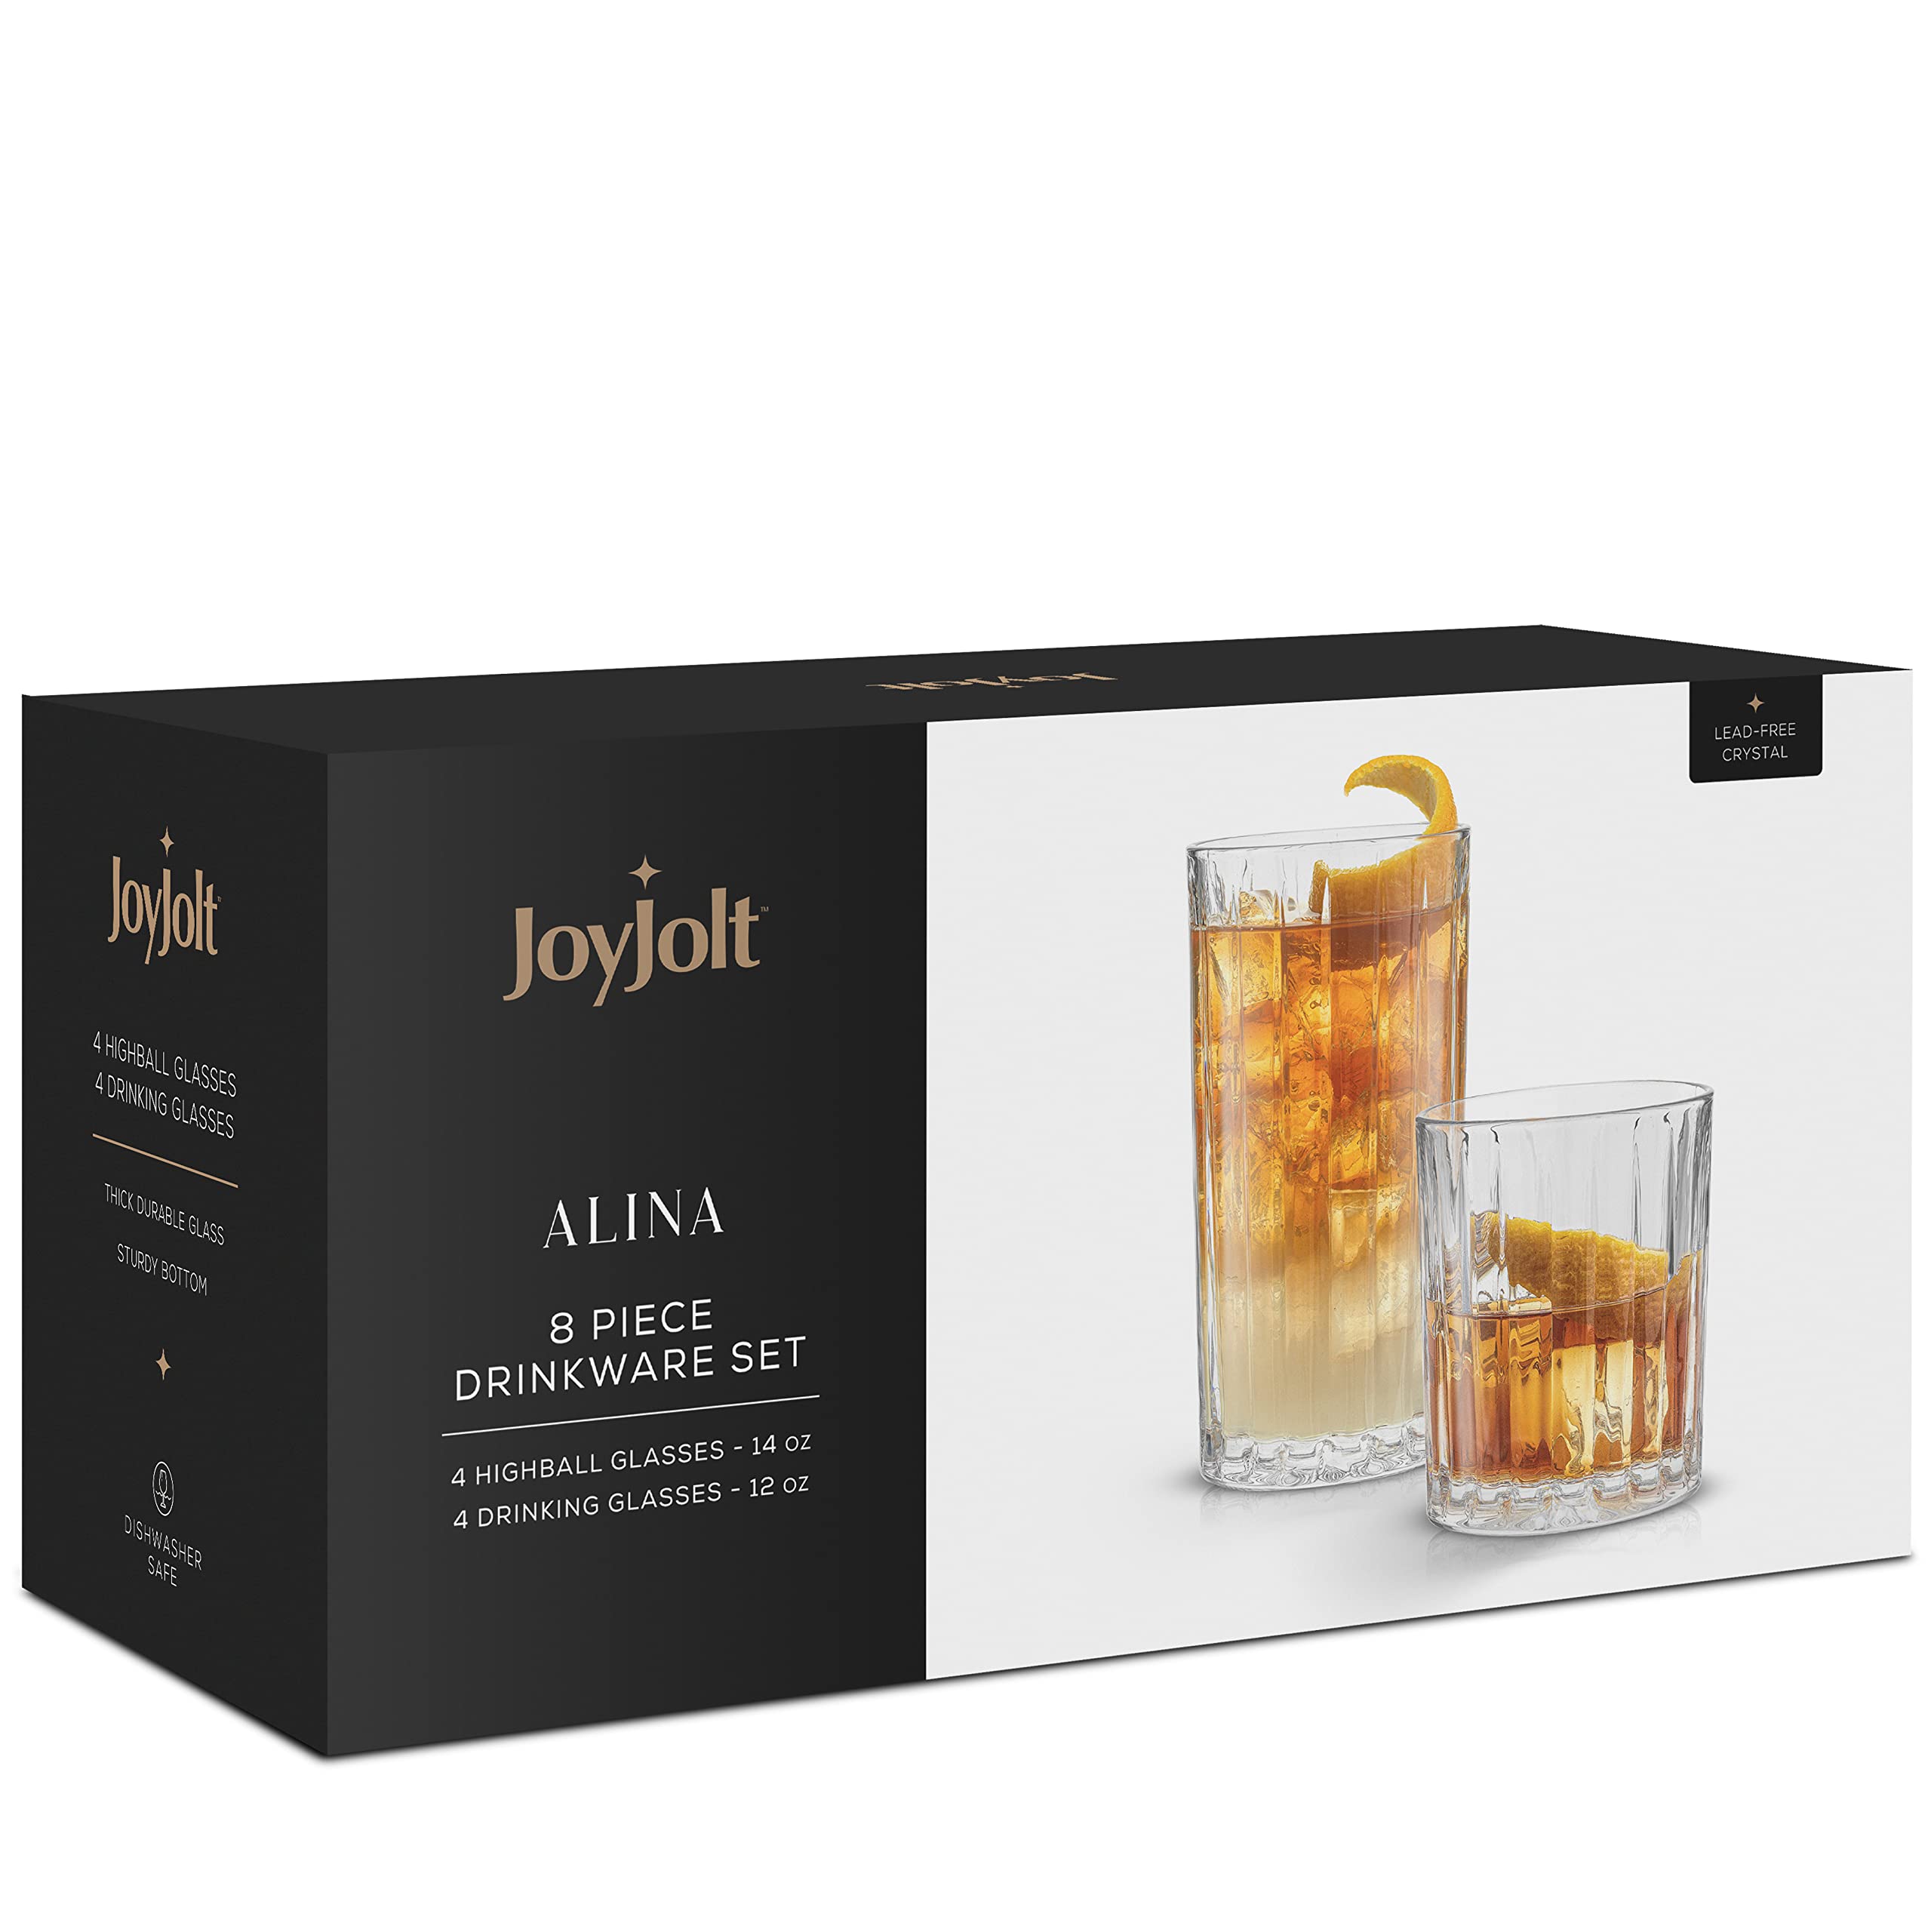 JoyJolt Drinking Glasses Set of 8, Alina Ribbed Glassware. 12oz Rocks Glasses and 14oz Highball Glasses. Cocktail Glasses, Iced Coffee Cup or Water Glasses. Heavy Base Glassware Set